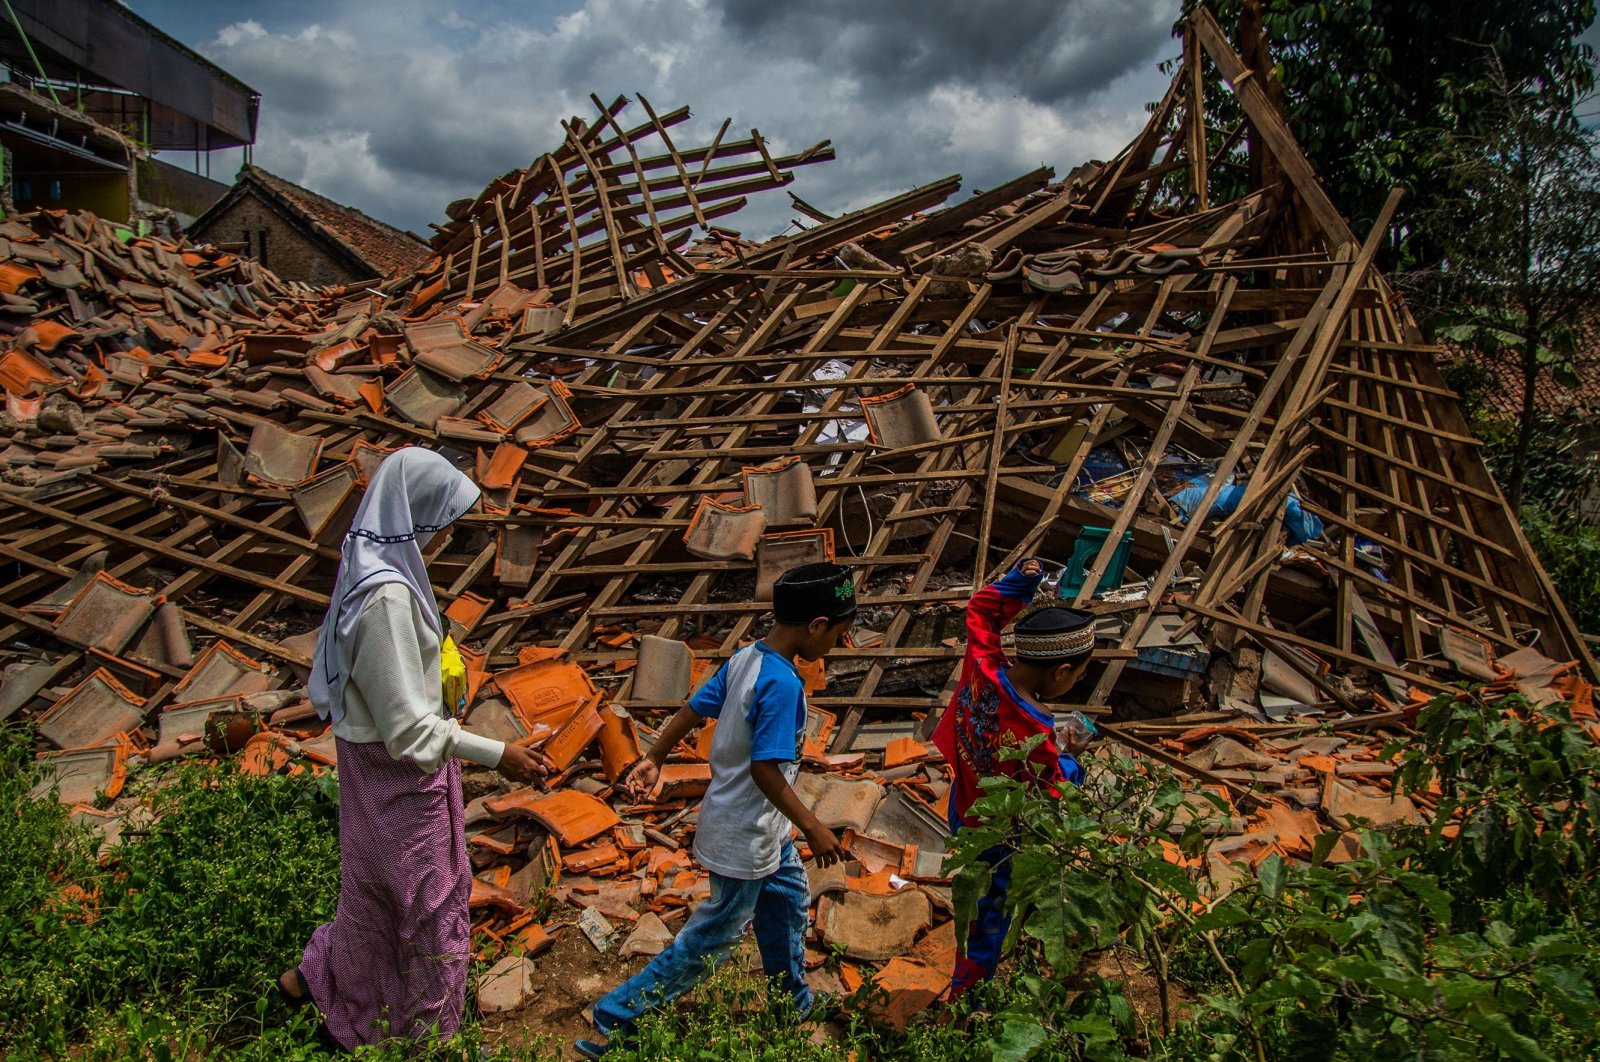 Children walk past a house that collapsed in an earthquake, Cianjur, West Java, Indonesia, Dec. 1, 2022. (AFP Photo)